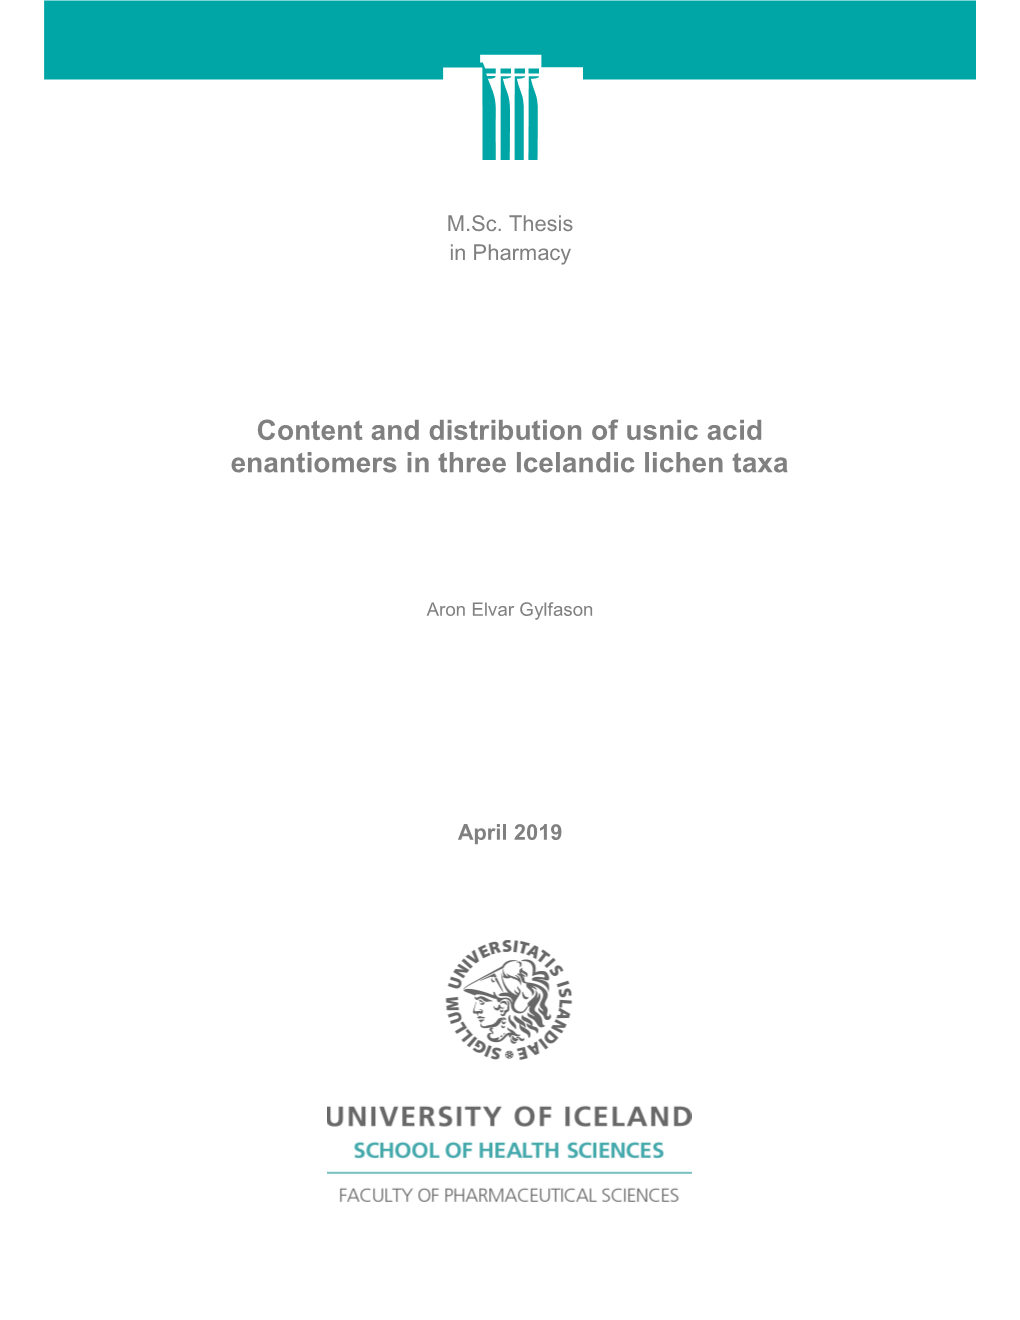 Content and Distribution of Usnic Acid Enantiomers in Three Icelandic Lichen Taxa